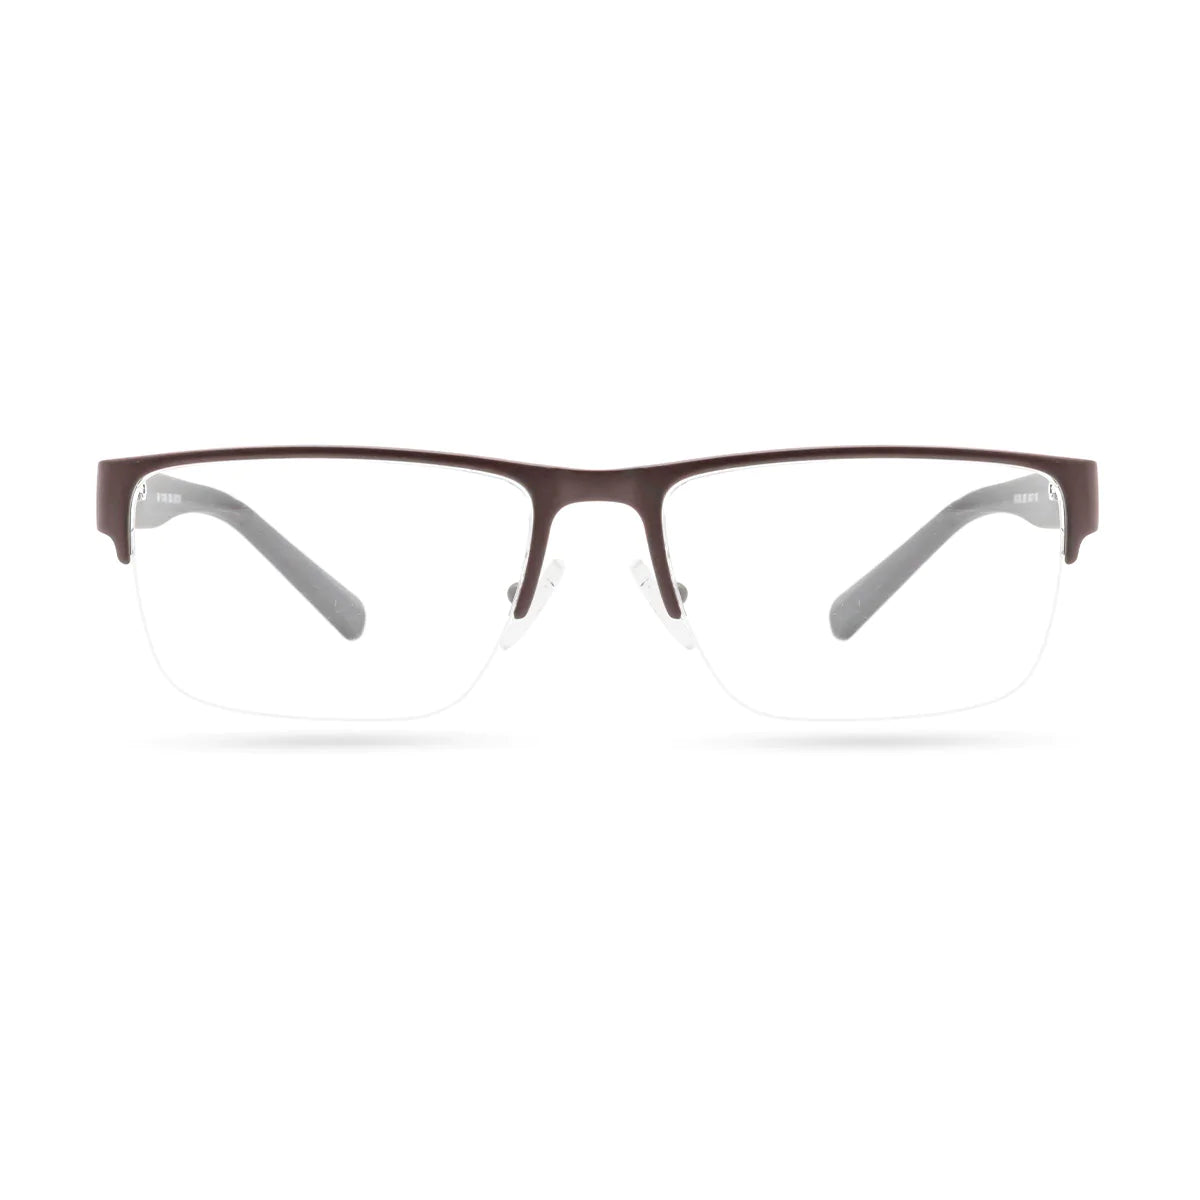 ARMANI EXCHANGE AX 1018 6001 spectacle-frame